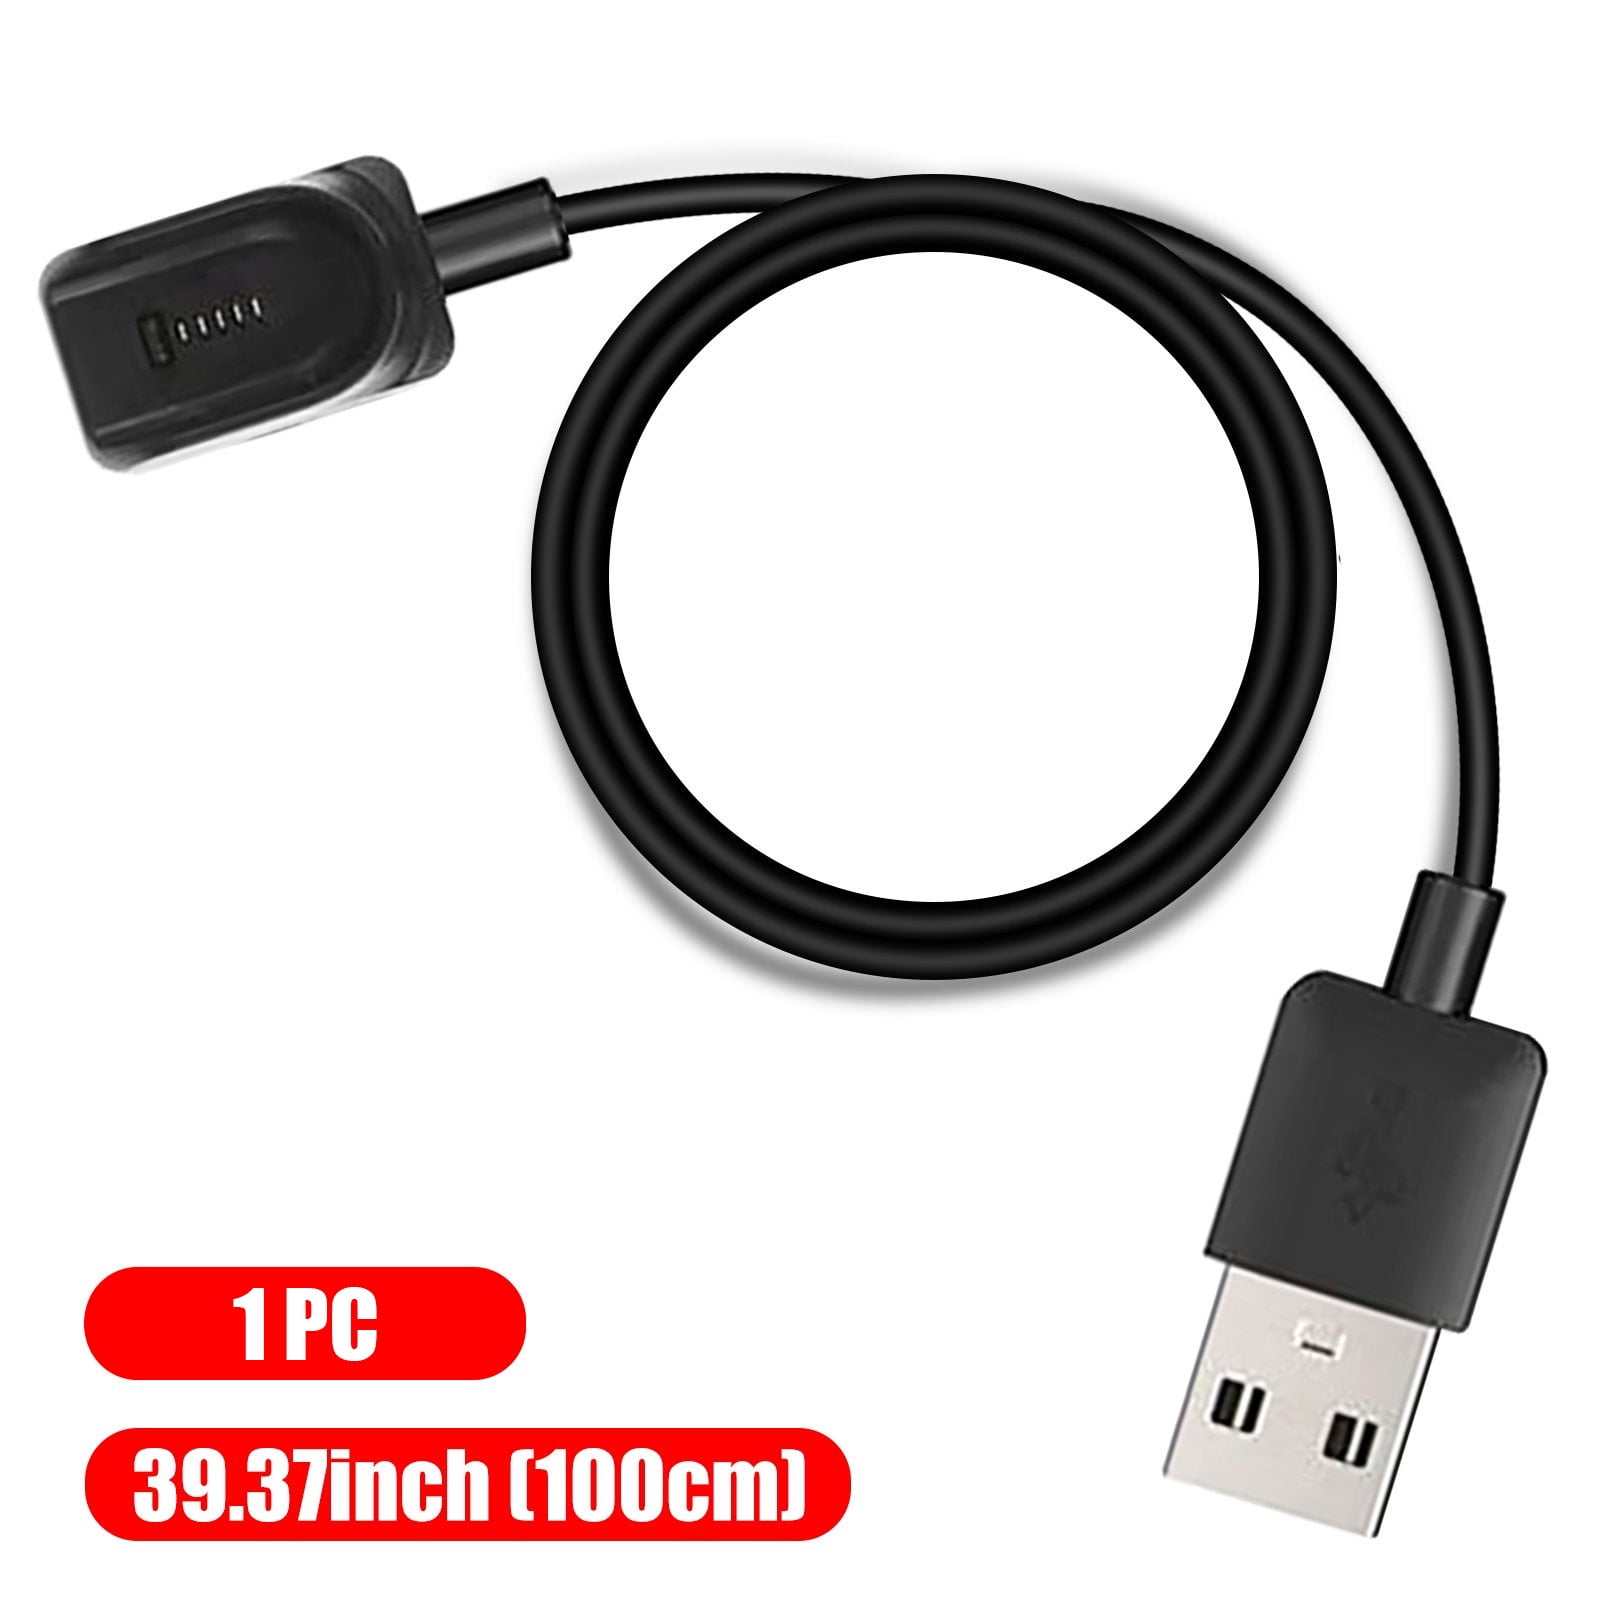 TX USB Charging Cable Cord Charger For Fitbit Flex 2 Band Bracelet Wristband ol 